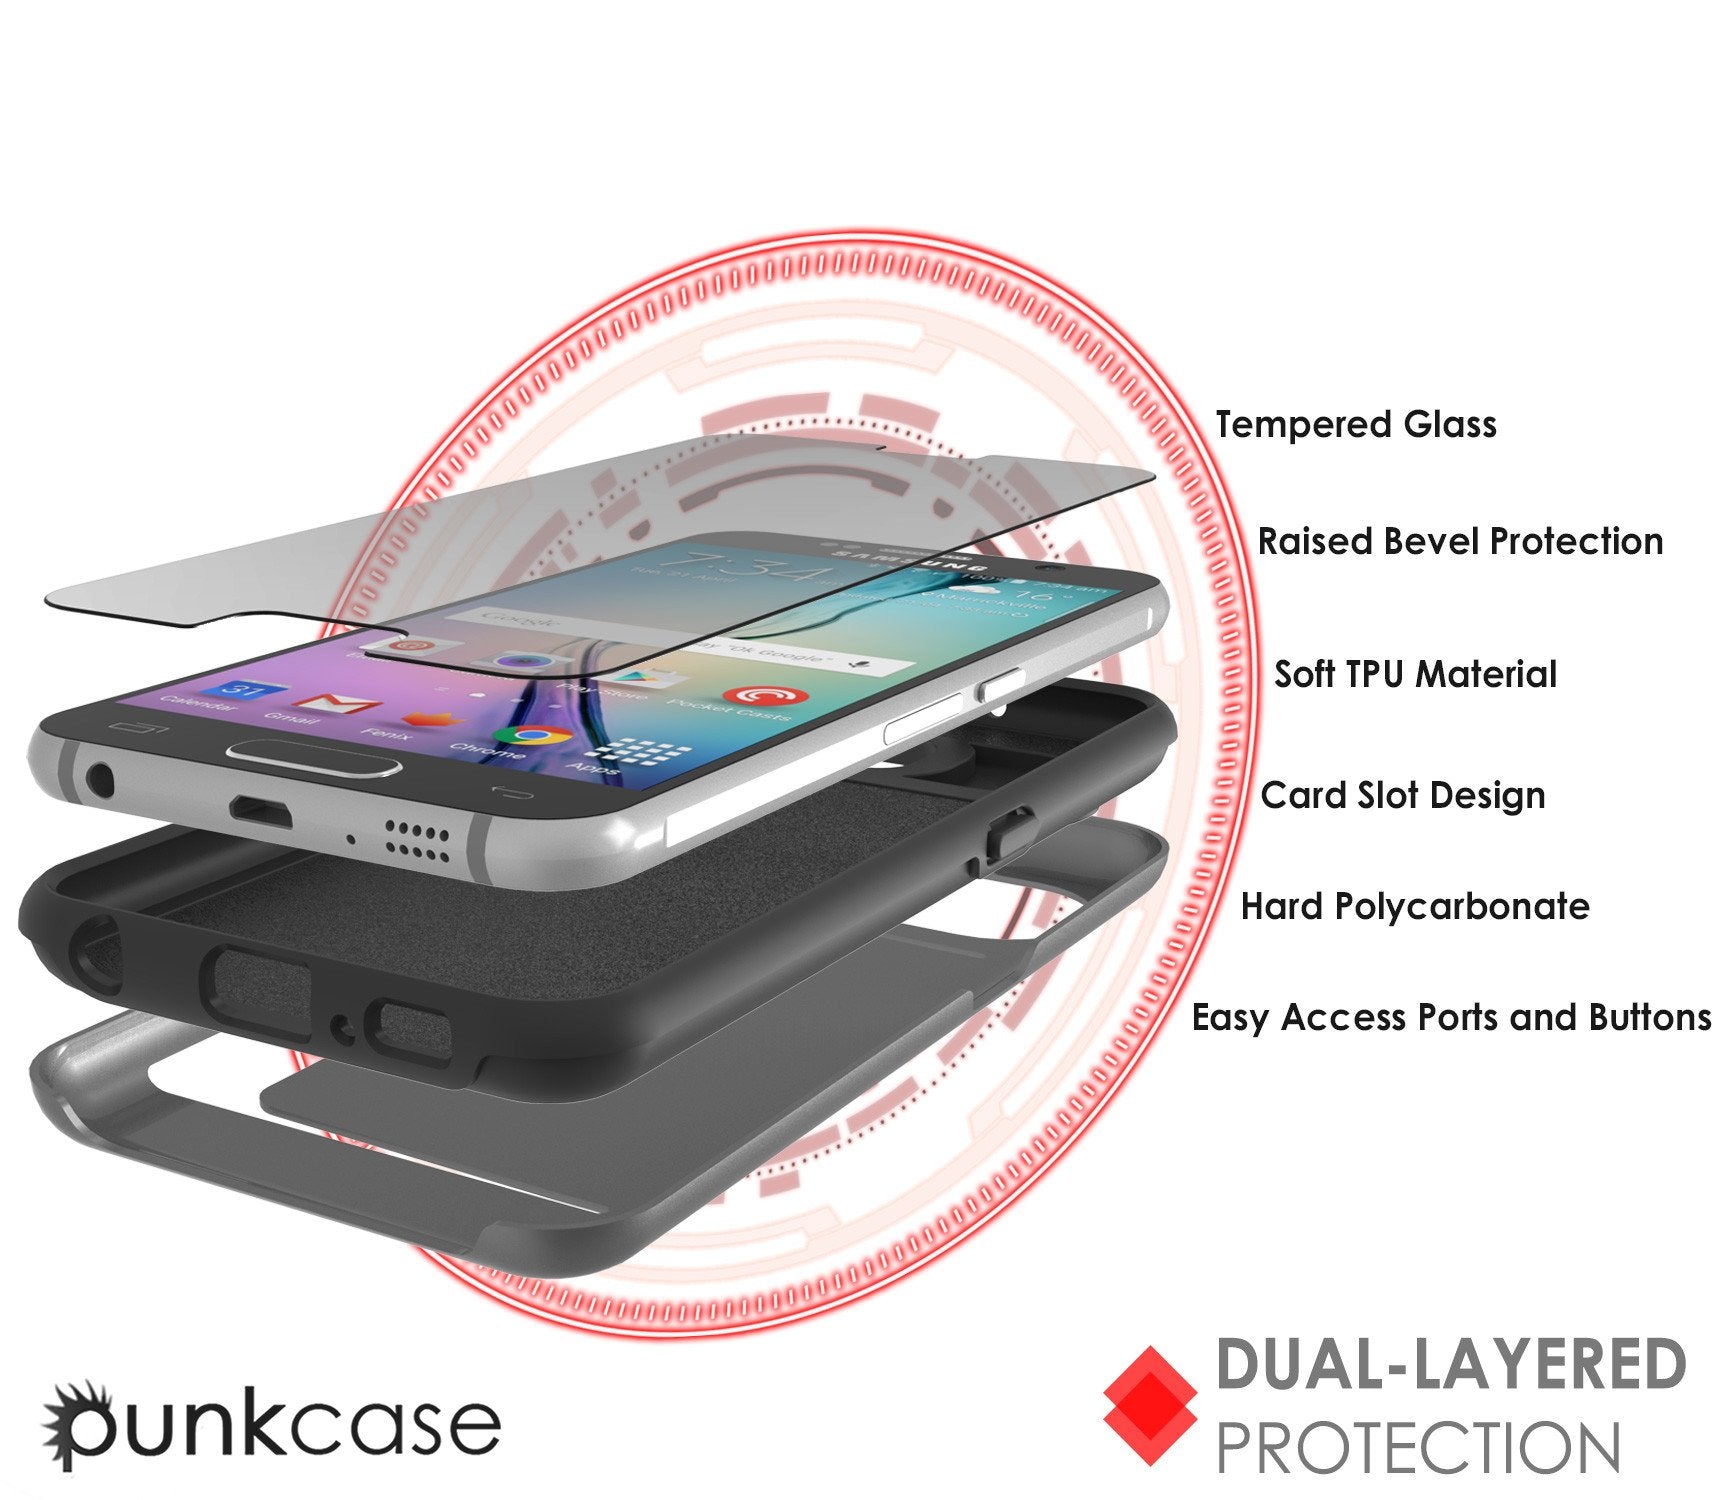 Galaxy s6 Case PunkCase CLUTCH Grey Series Slim Armor Soft Cover Case w/ Tempered Glass